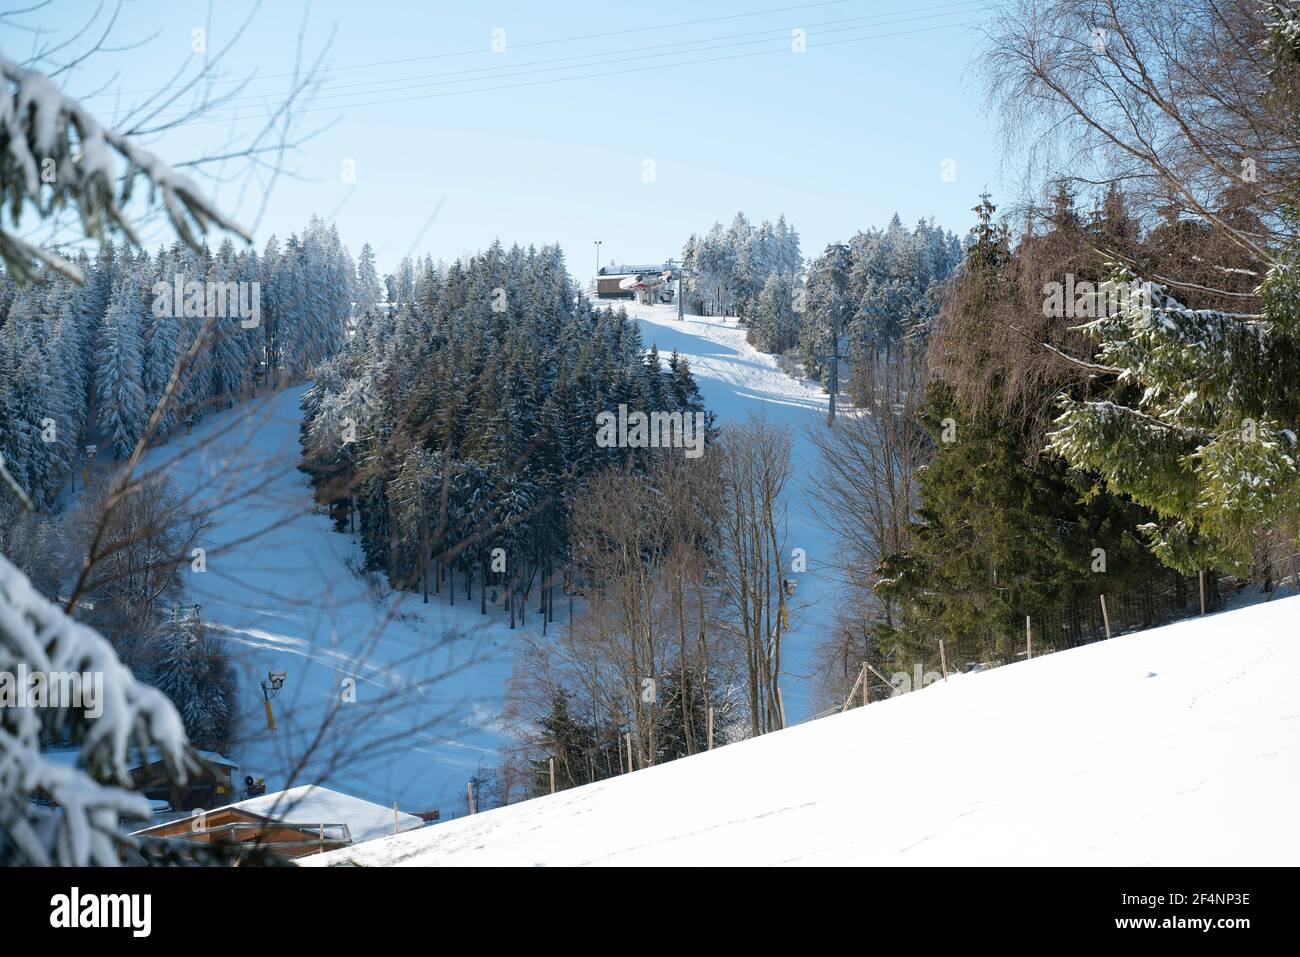 Winter sports slopes at the ski lift carousel Winterberg. Sledding slope and ski slopes between snow covered spruce forests. Stock Photo